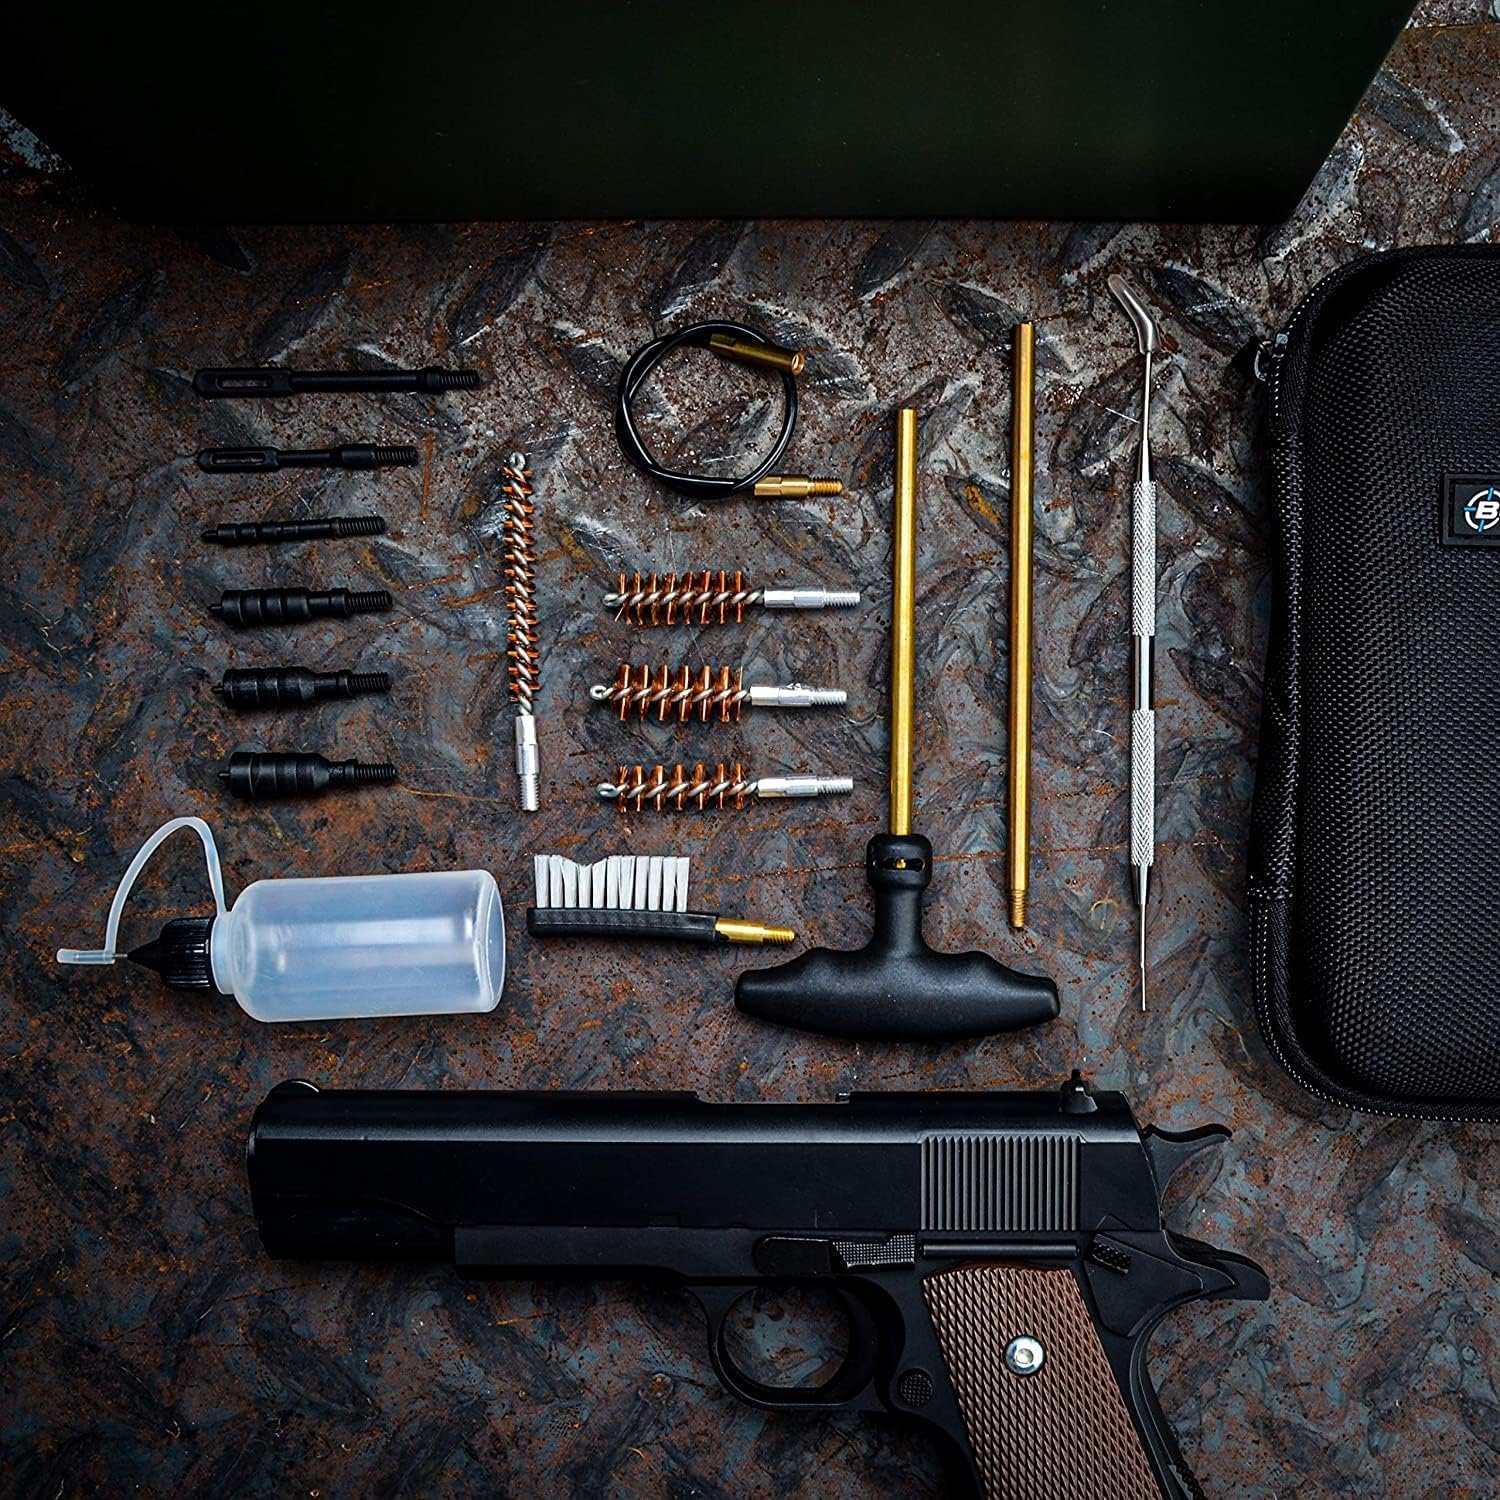 BOOSTEADY Universal Handgun Cleaning Kit Review